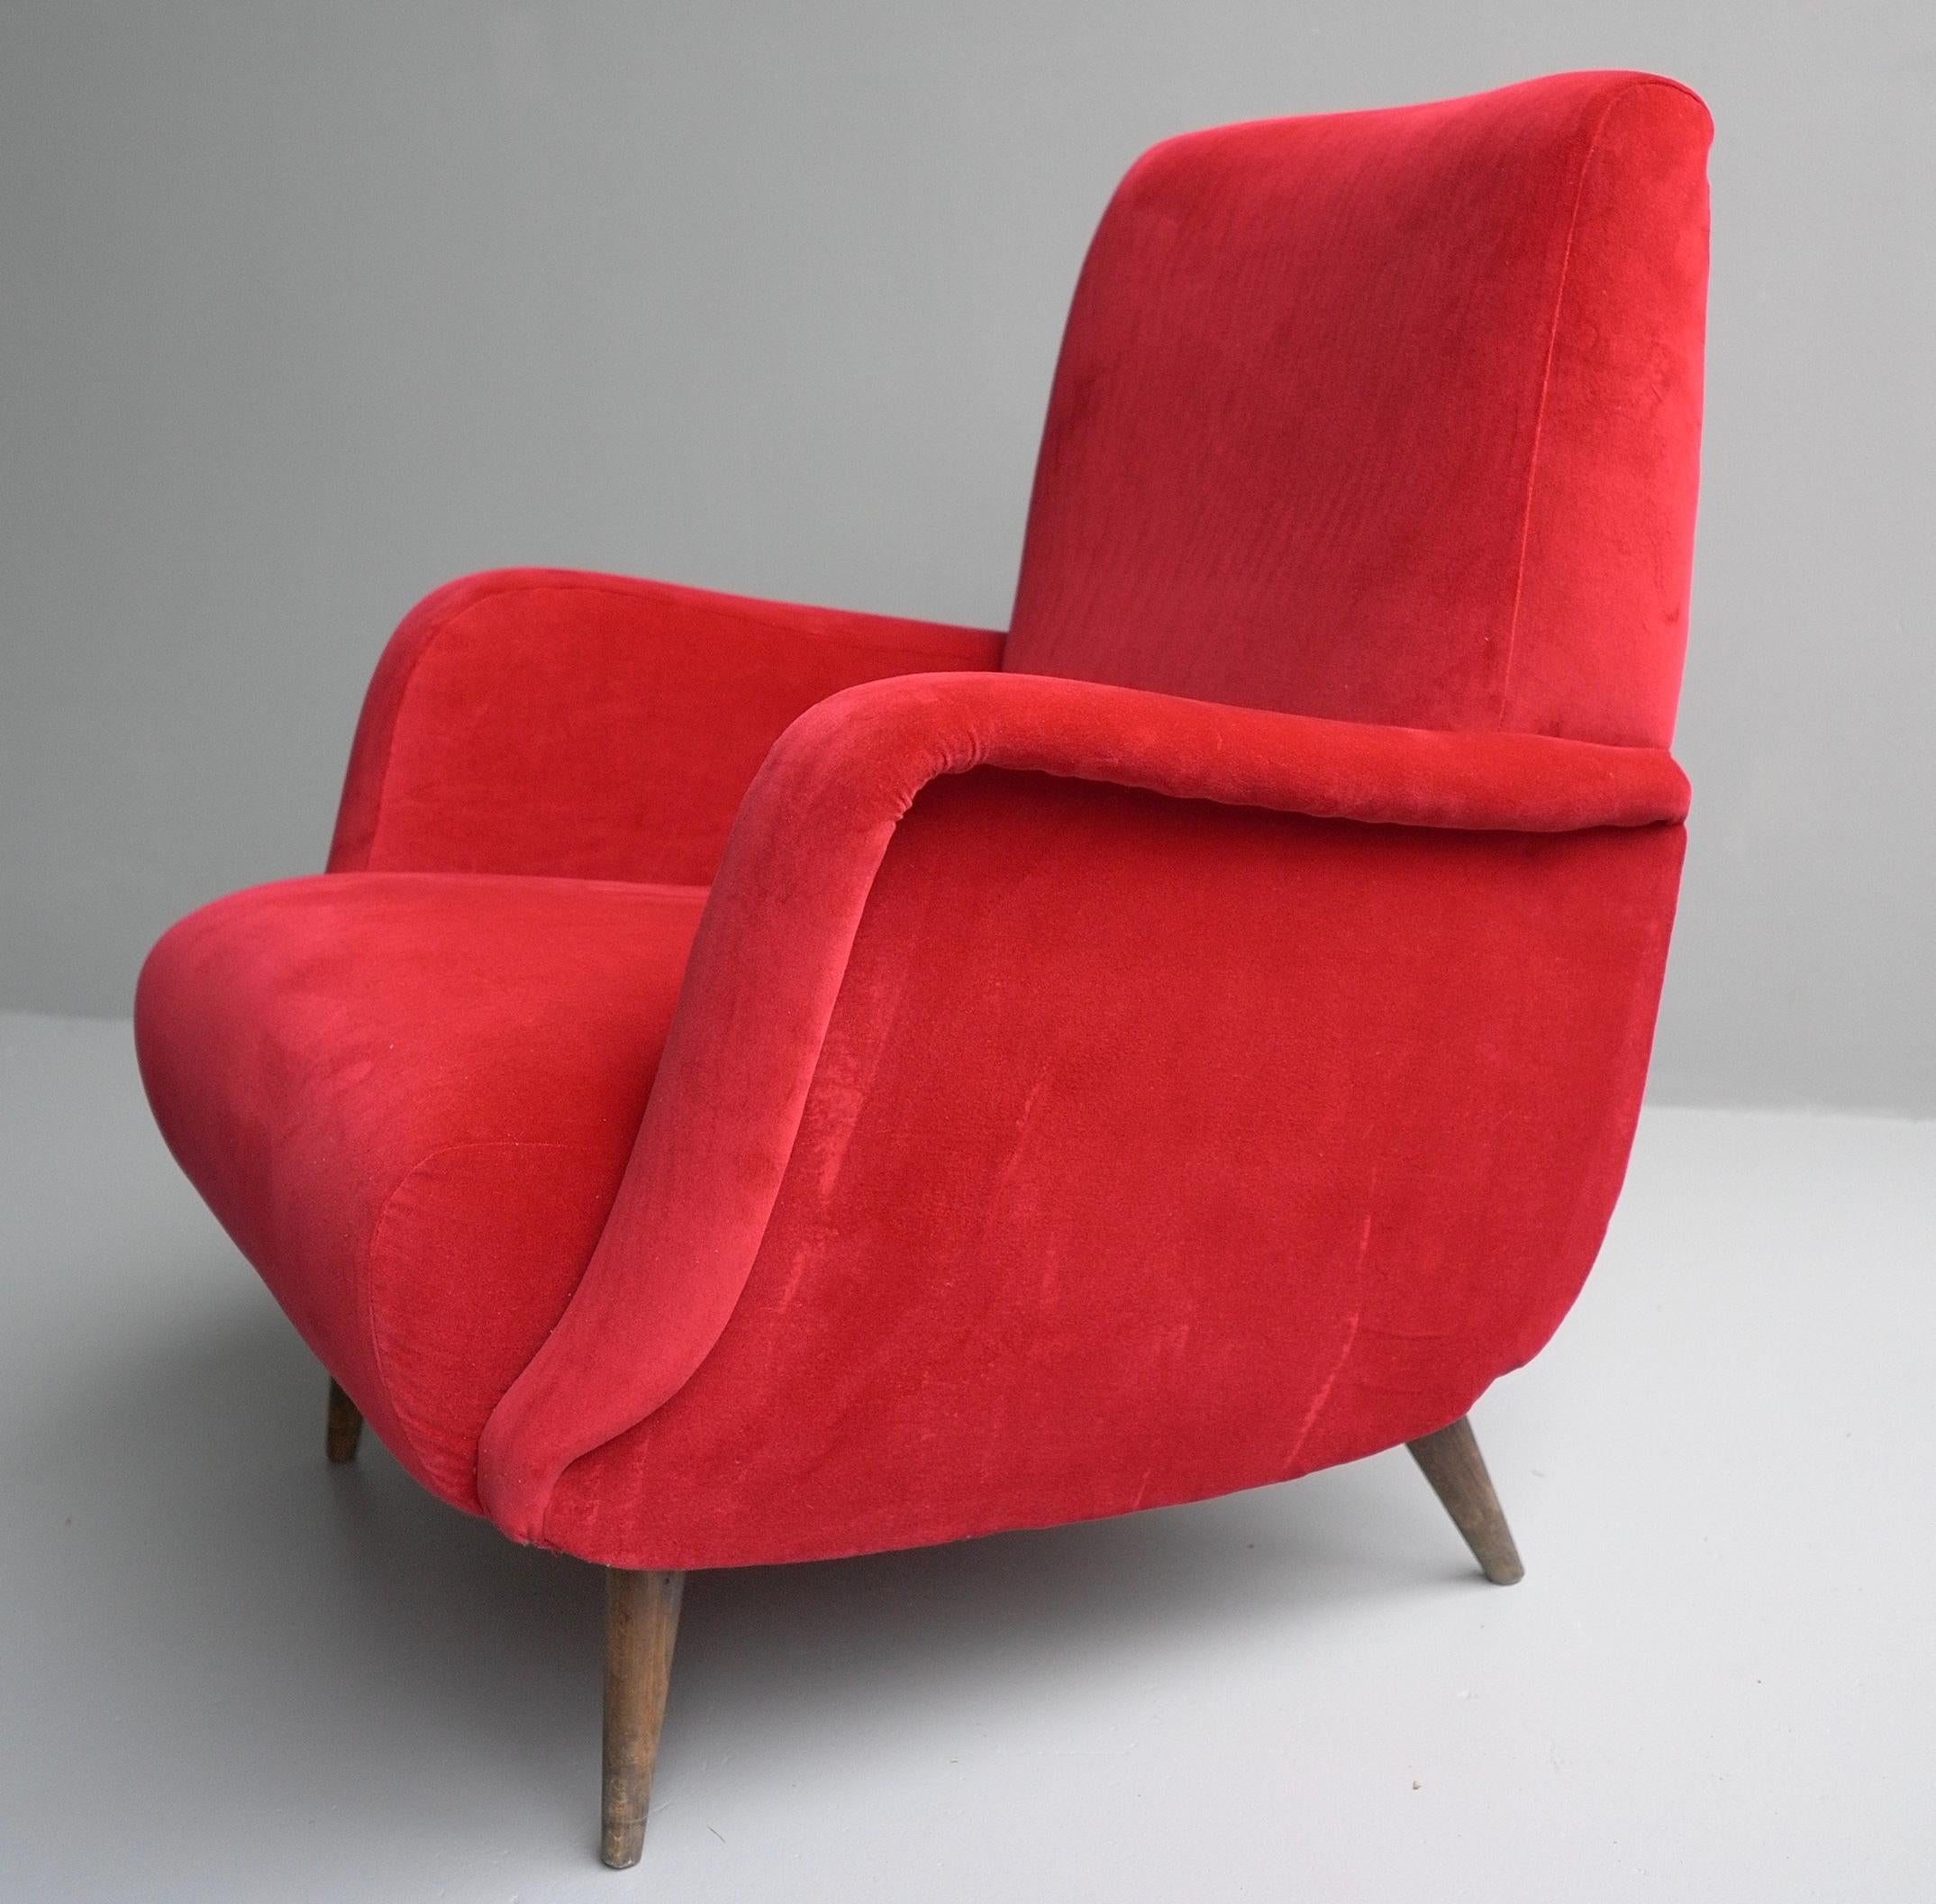 European Carlo de Carli Red velvet and Walnut Armchair Model 806 by Cassina, Italy, 1955 For Sale